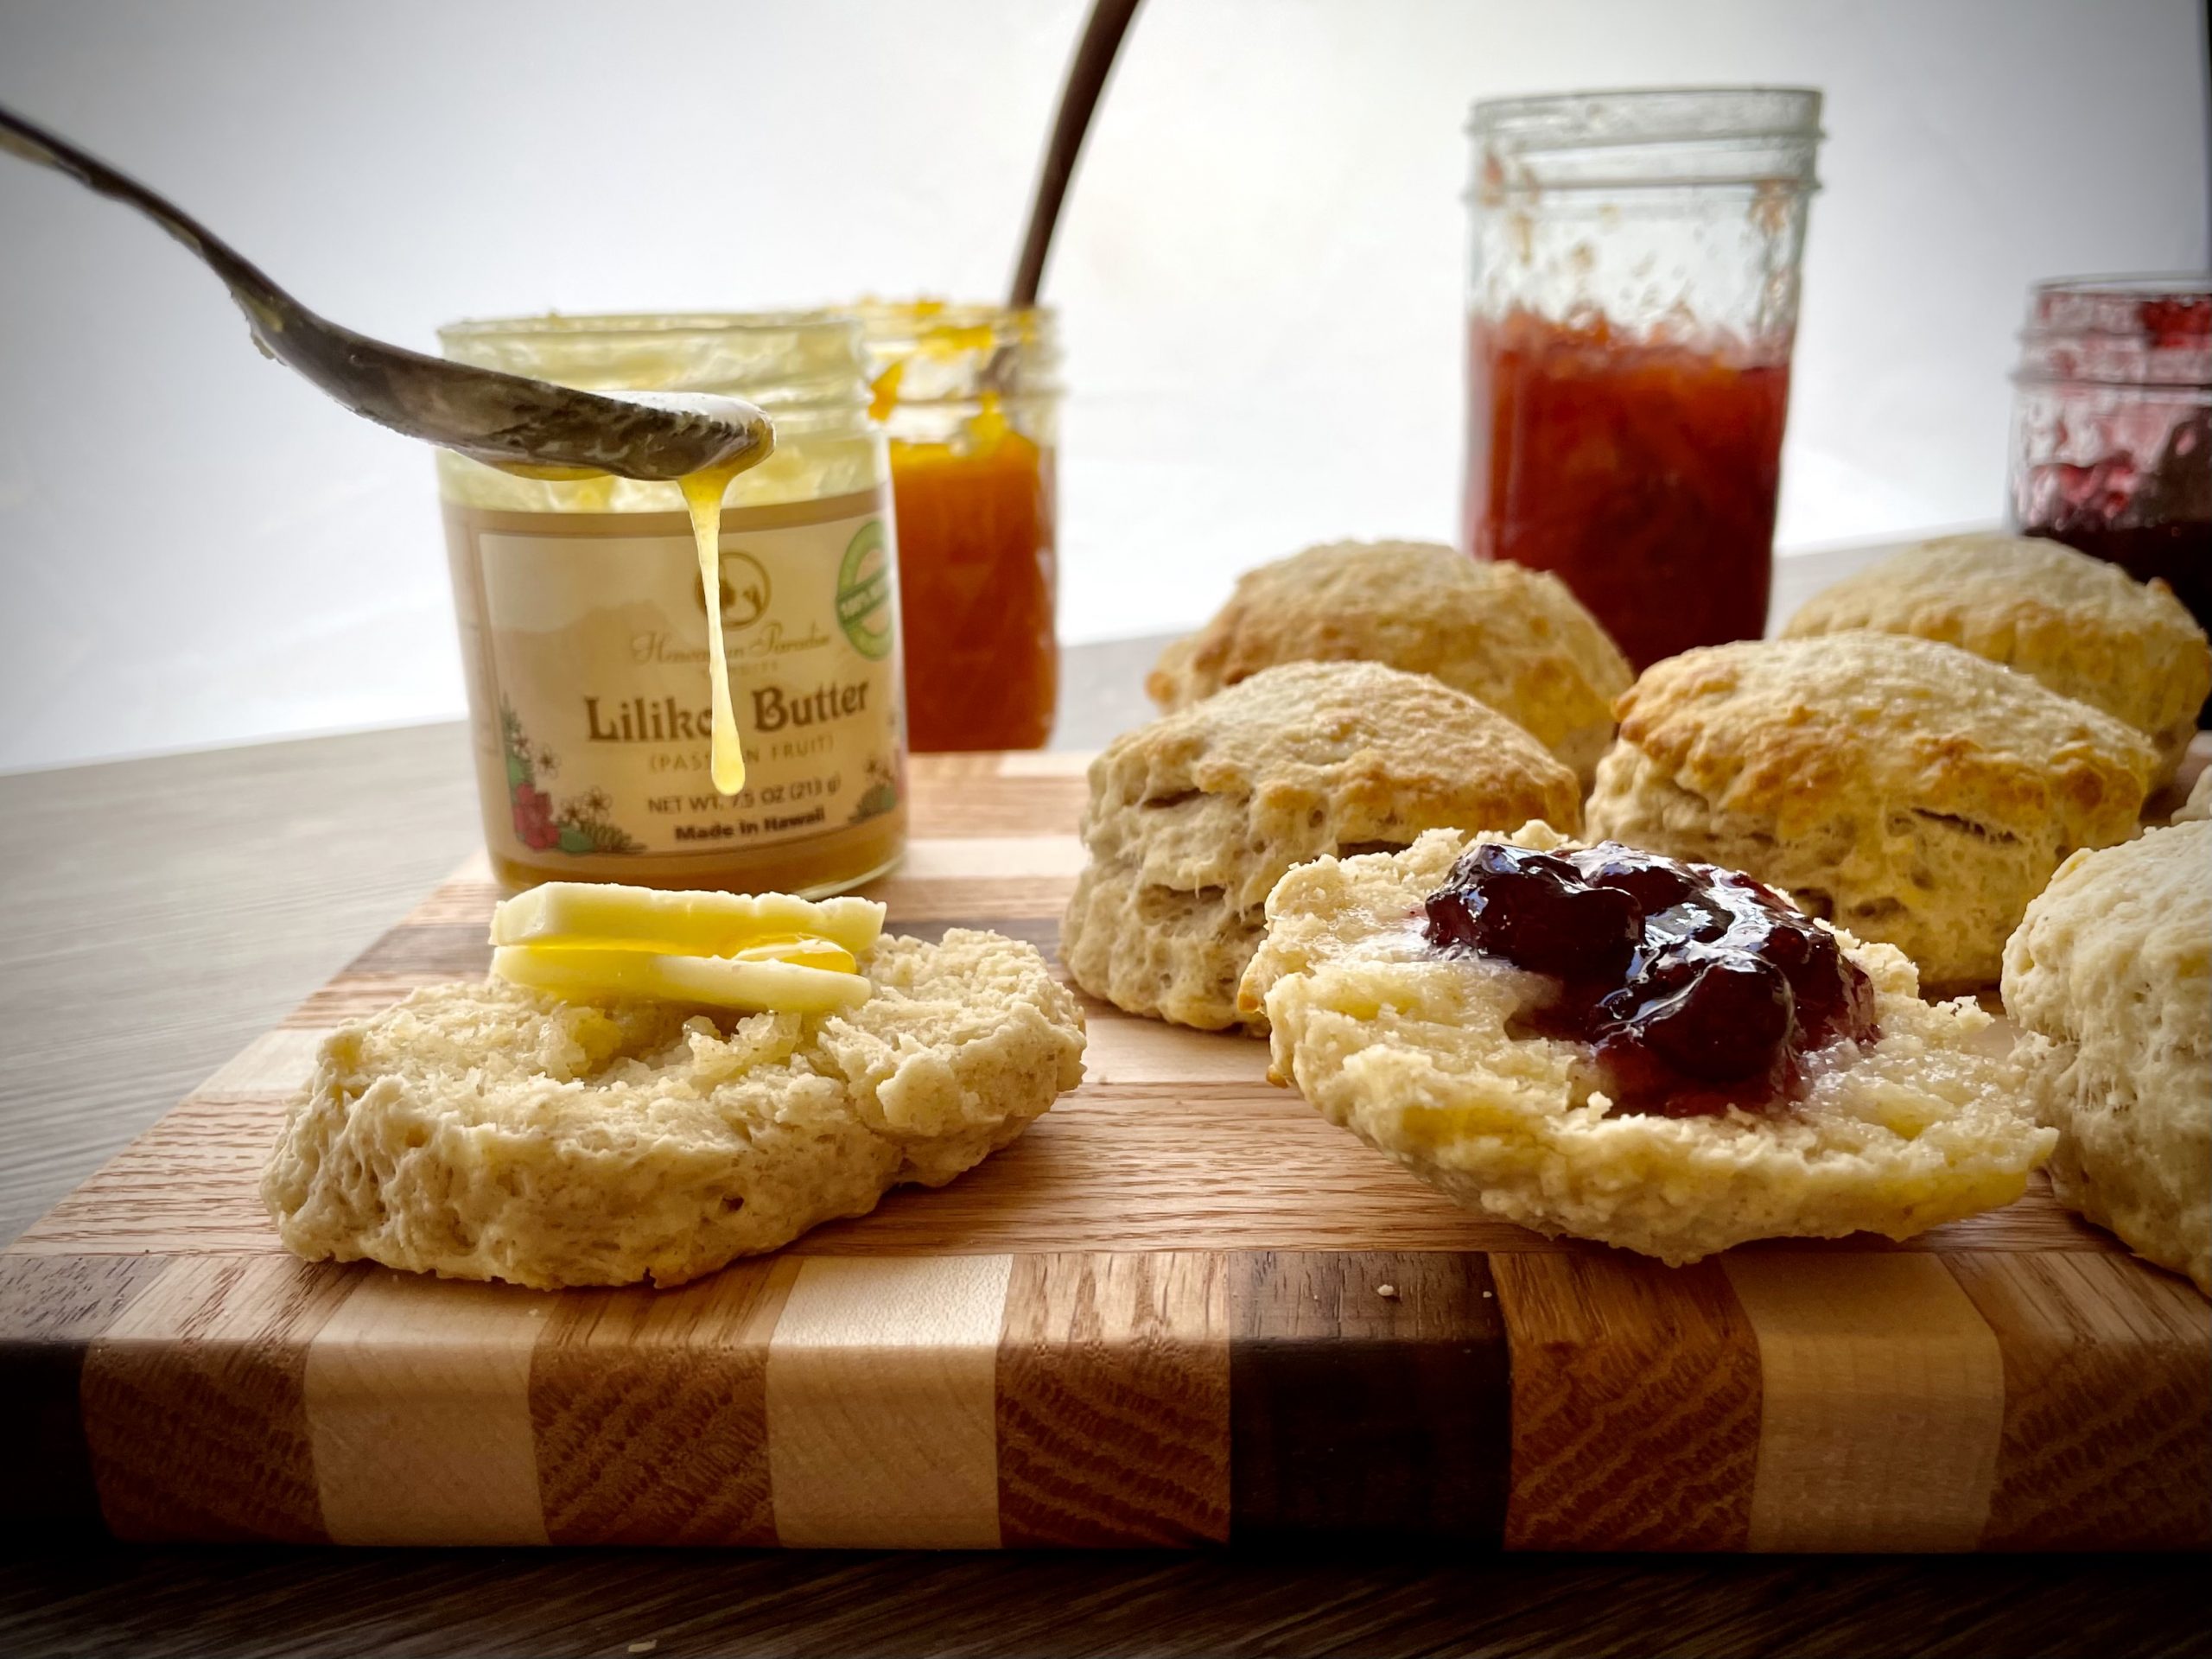 Scones served with butter and fruit preserves.